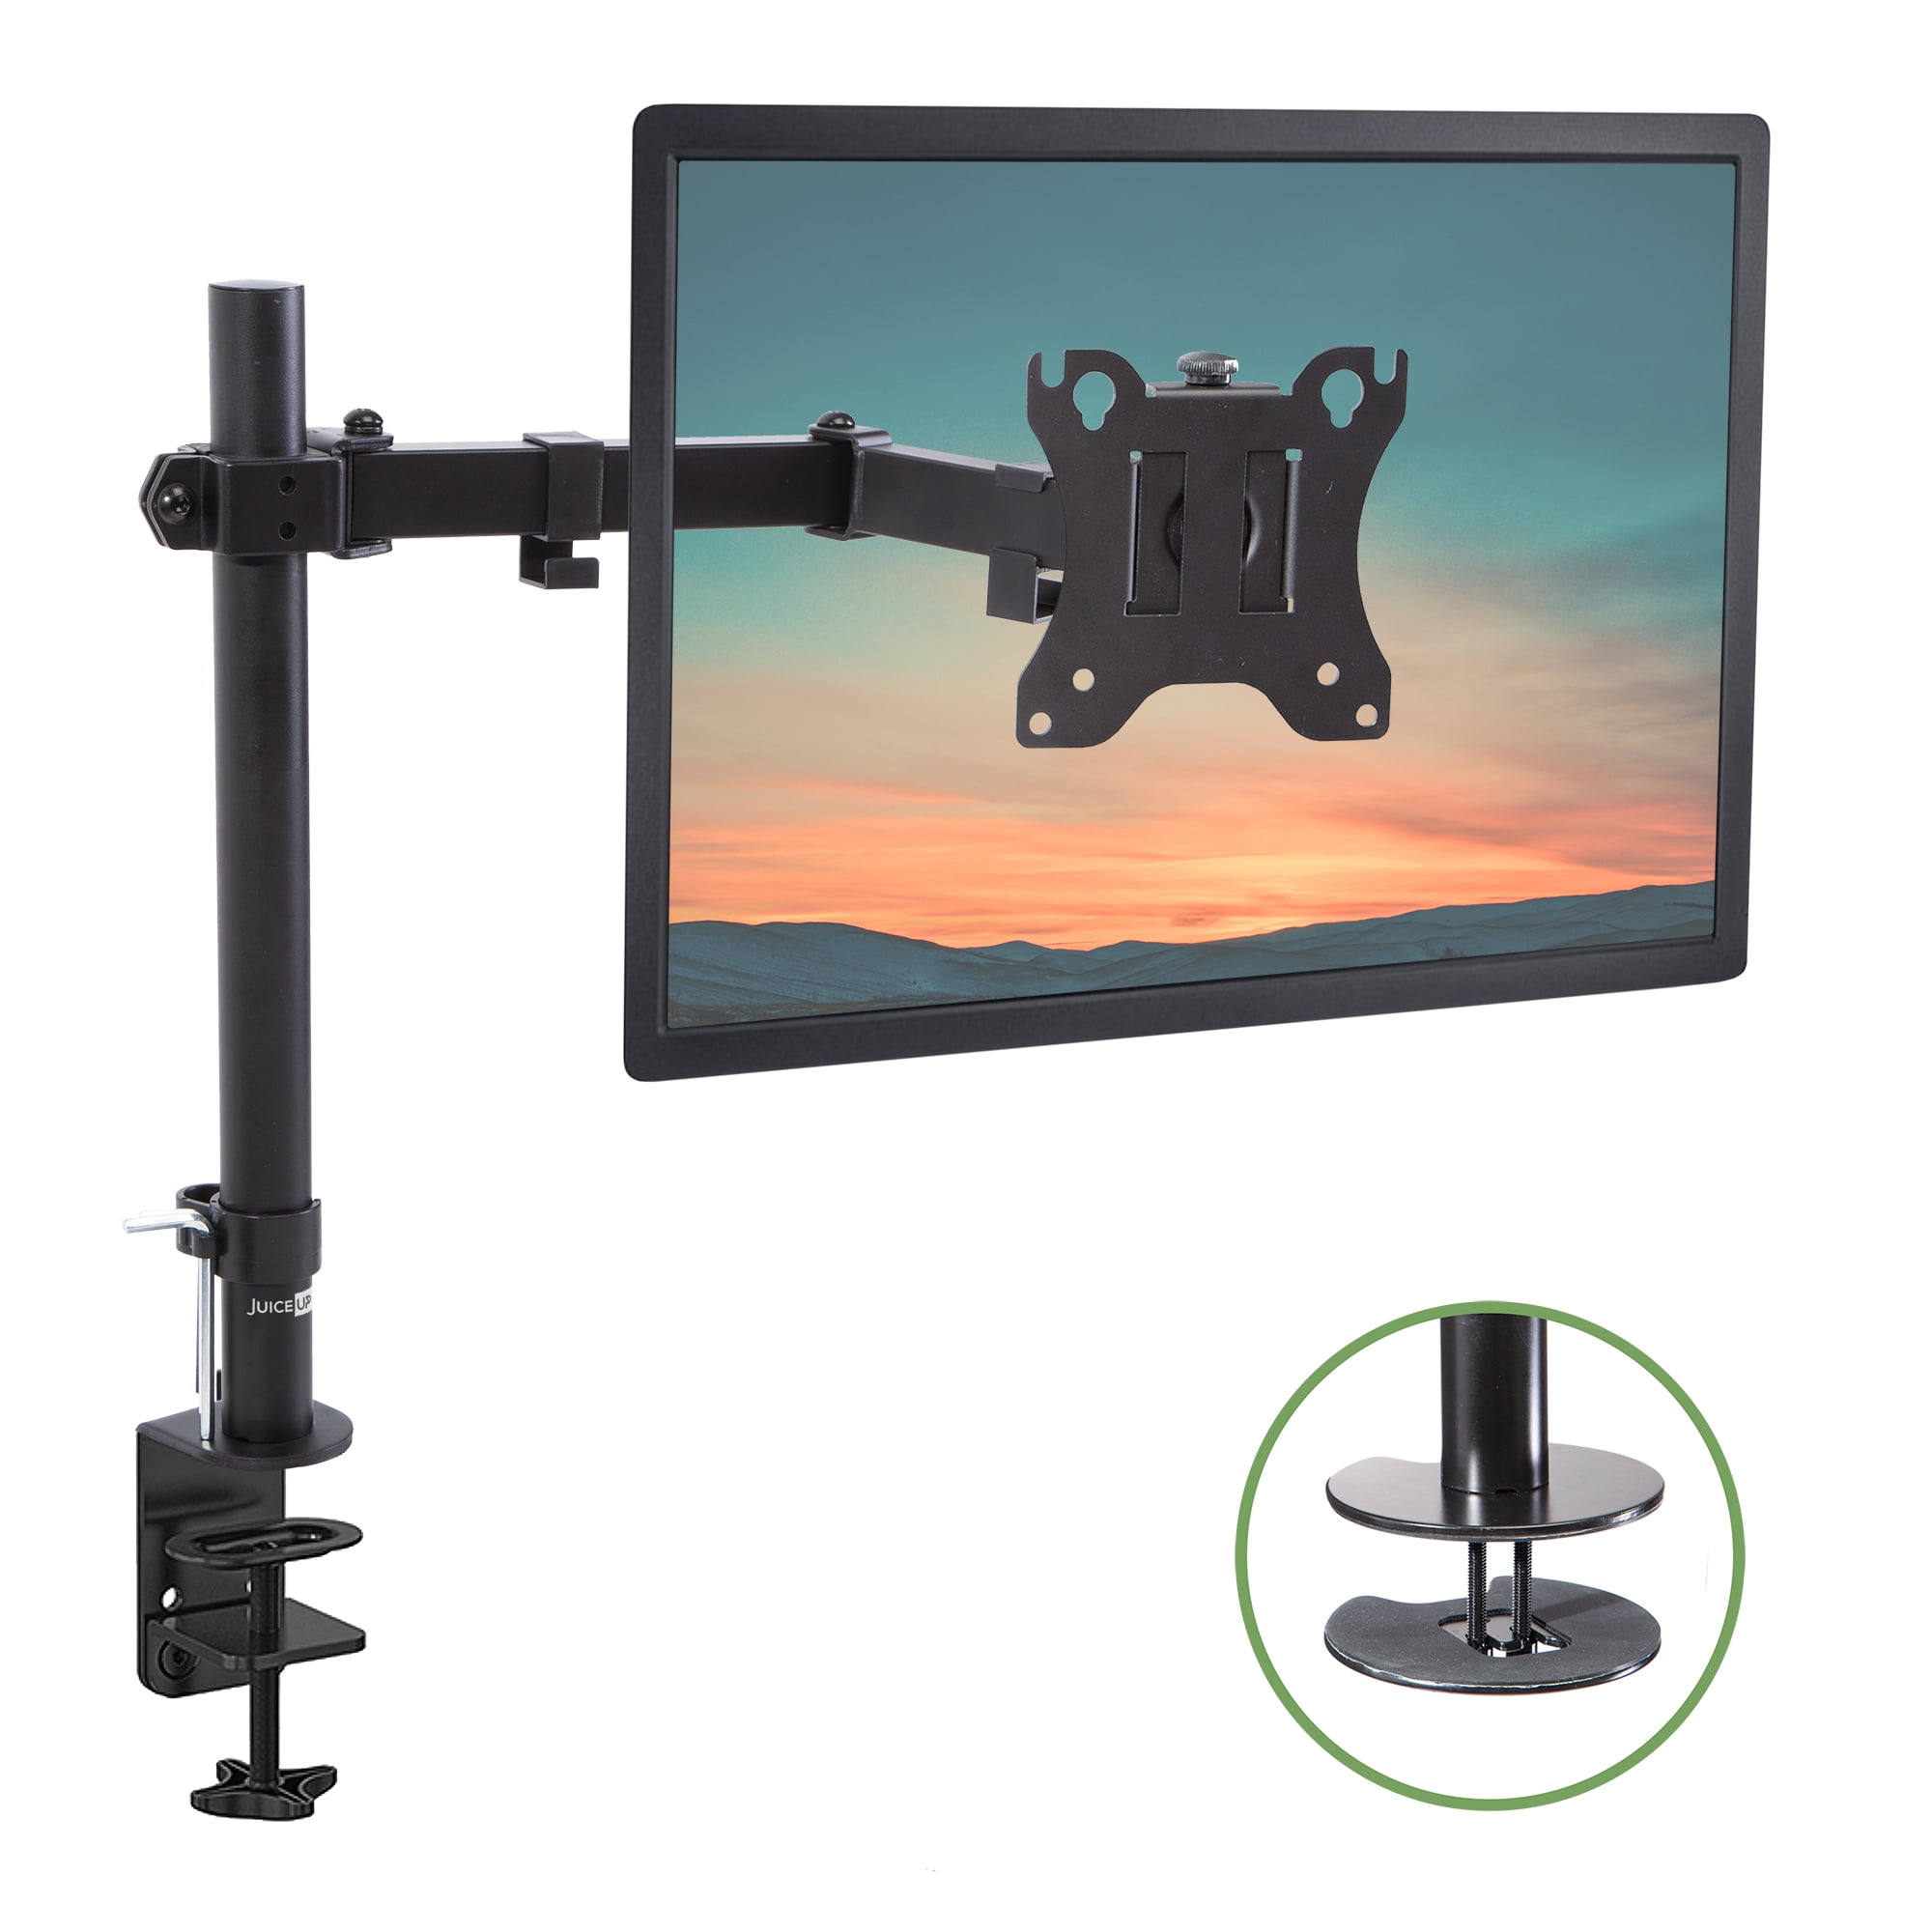 17.6 Lbs WHOLEV Single Arm Monitor Desk Mount Stand Fully Adjustable Fits for 1 Screen 13 to 27 